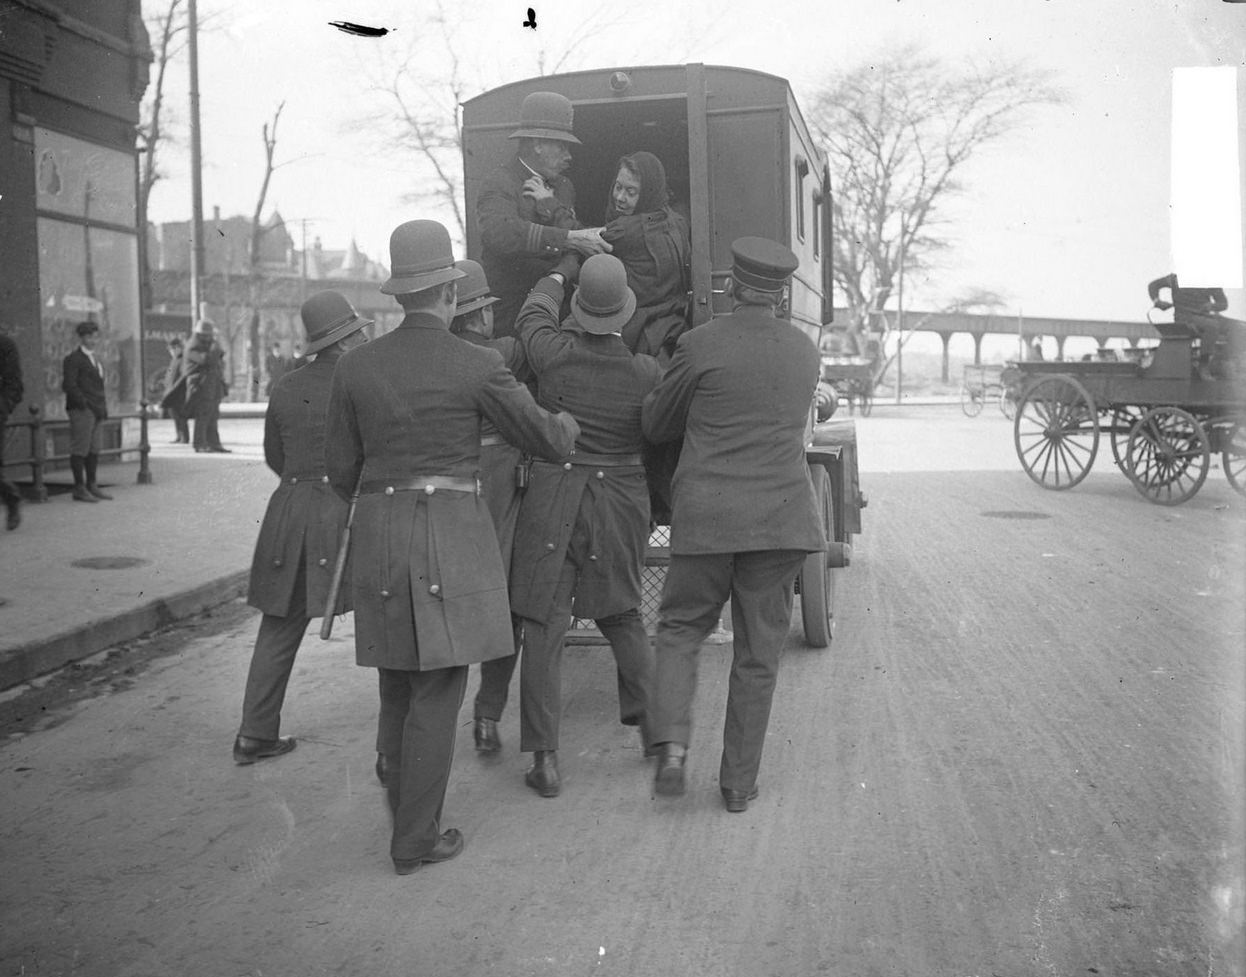 Police putting a woman into the back of a police wagon during Garment Workers Strike, Chicago, Illinois, 1910s.